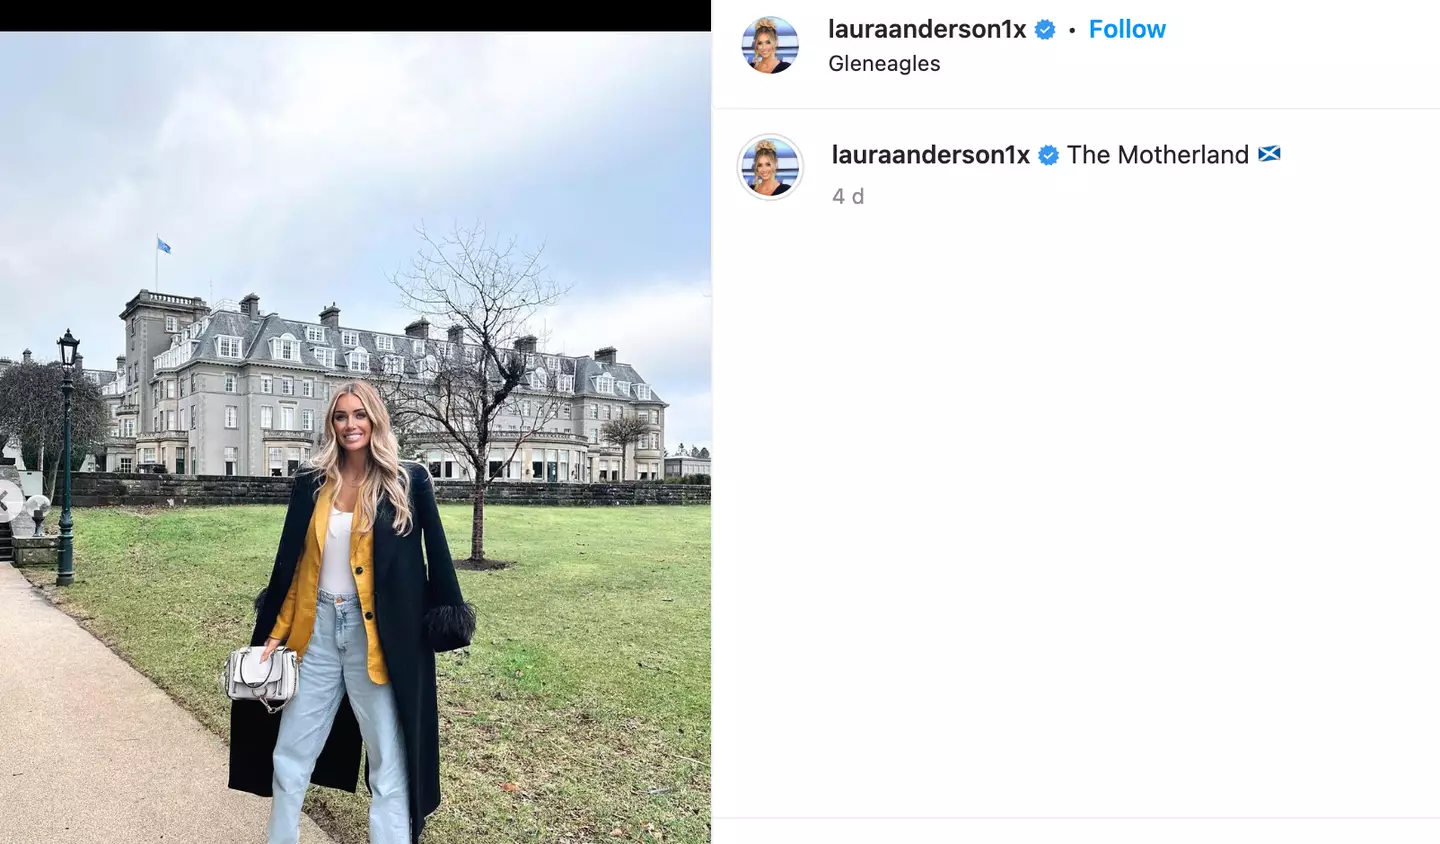 Laura recently shared a snap of herself in Scotland.